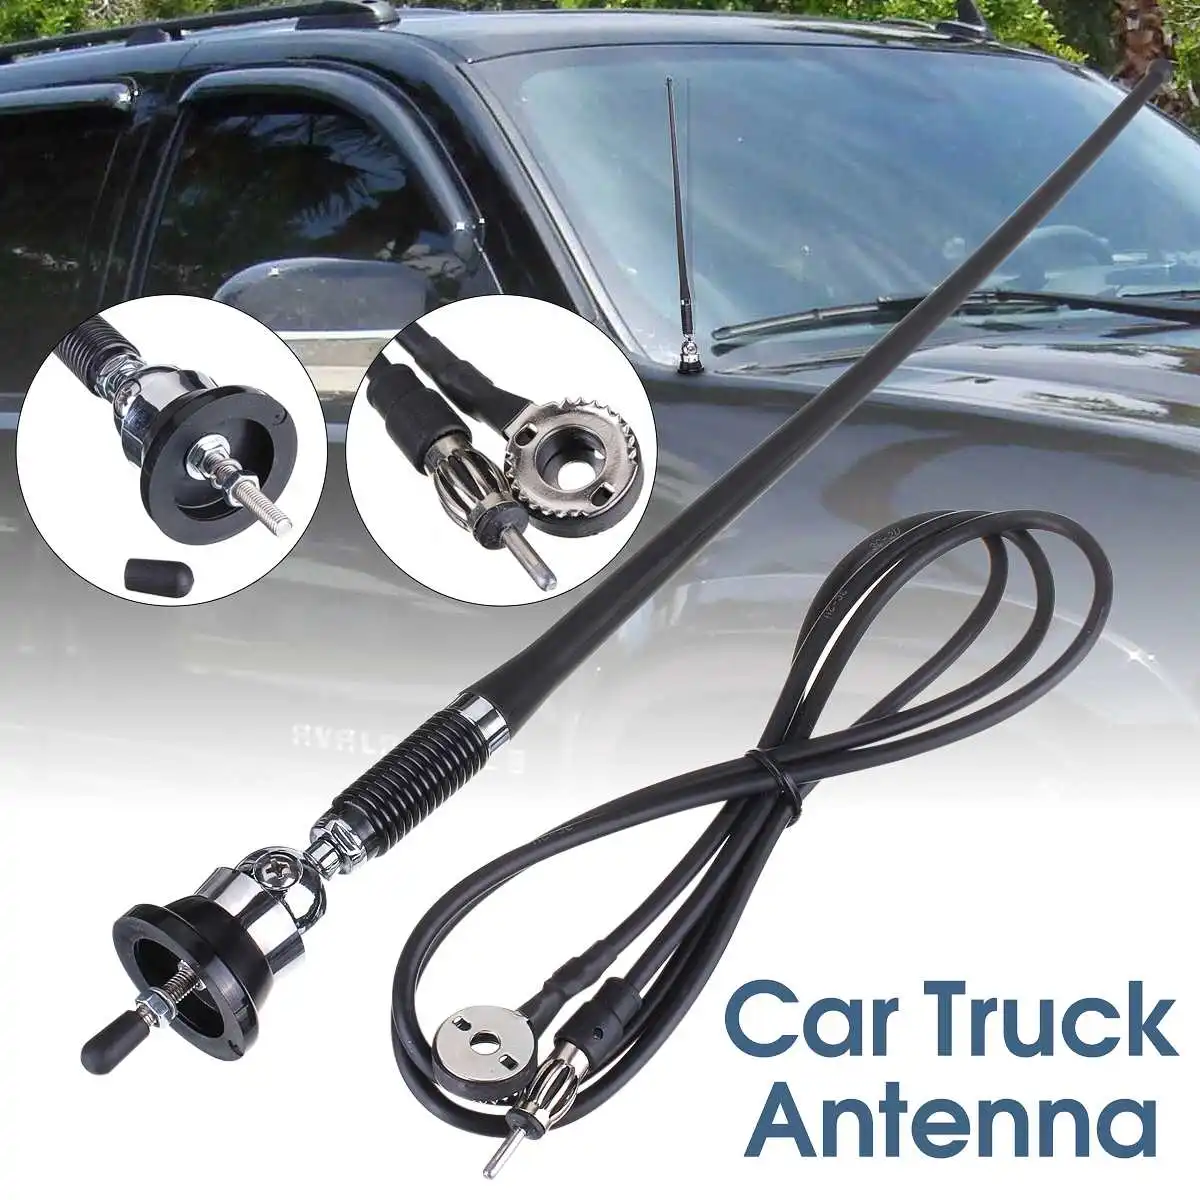 

36cm Car Roof Aerial Antenna FM/AM Radio Stereo Top Mast Roof Mounting Aerial Universal For Lada VW BMW Toyota Audi Benz